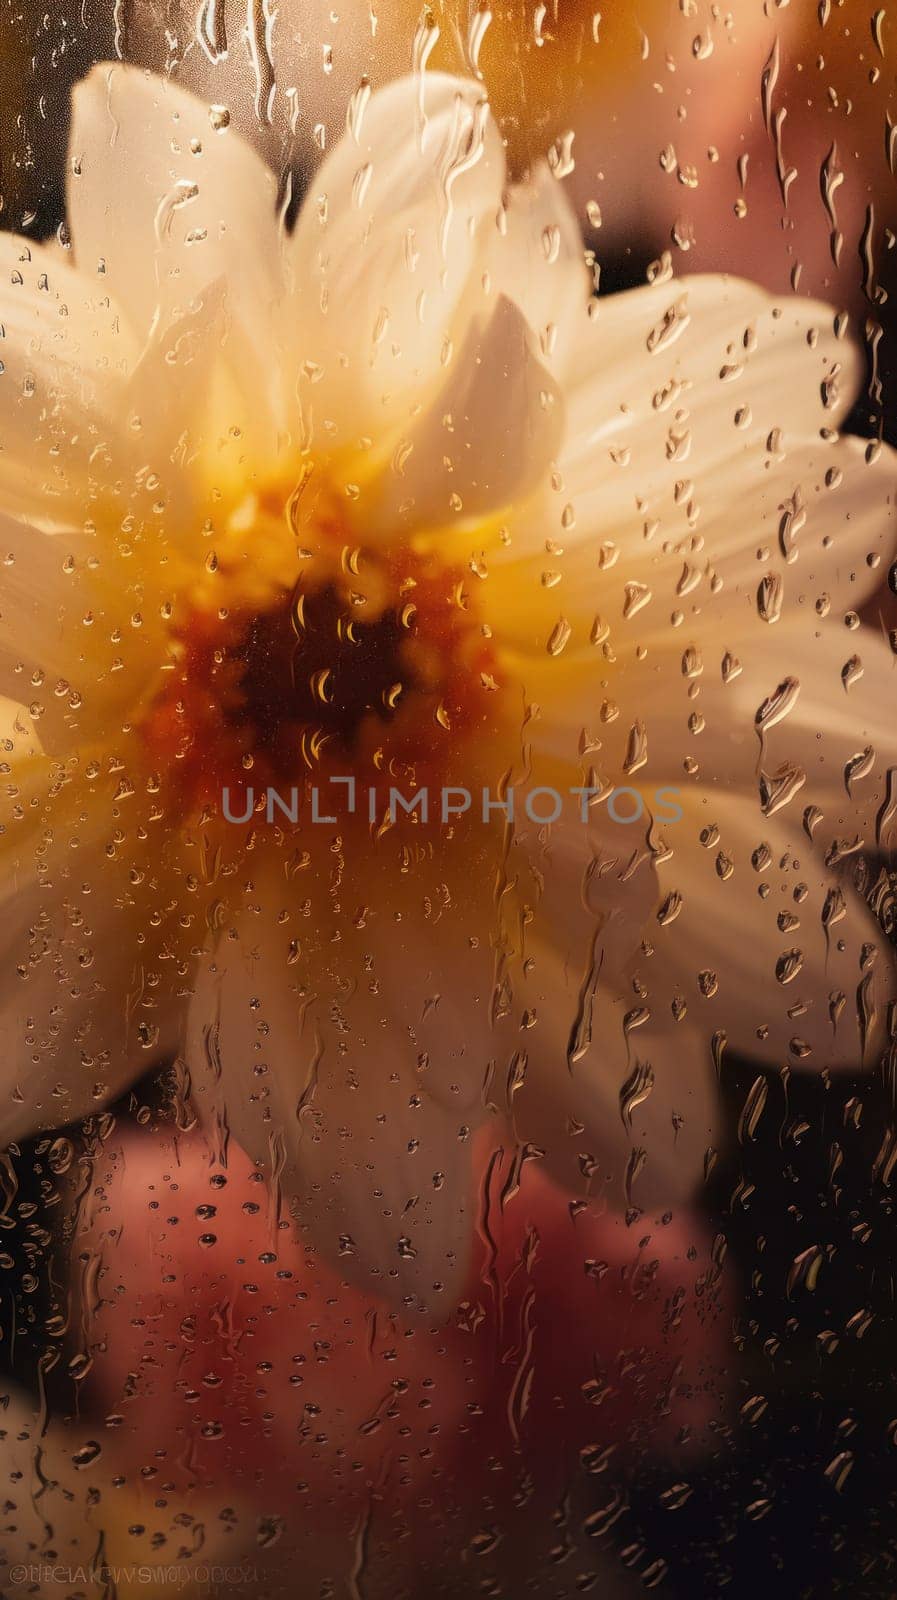 Background of blooming flowers in front of glass with water drops Stock Photo by nijieimu